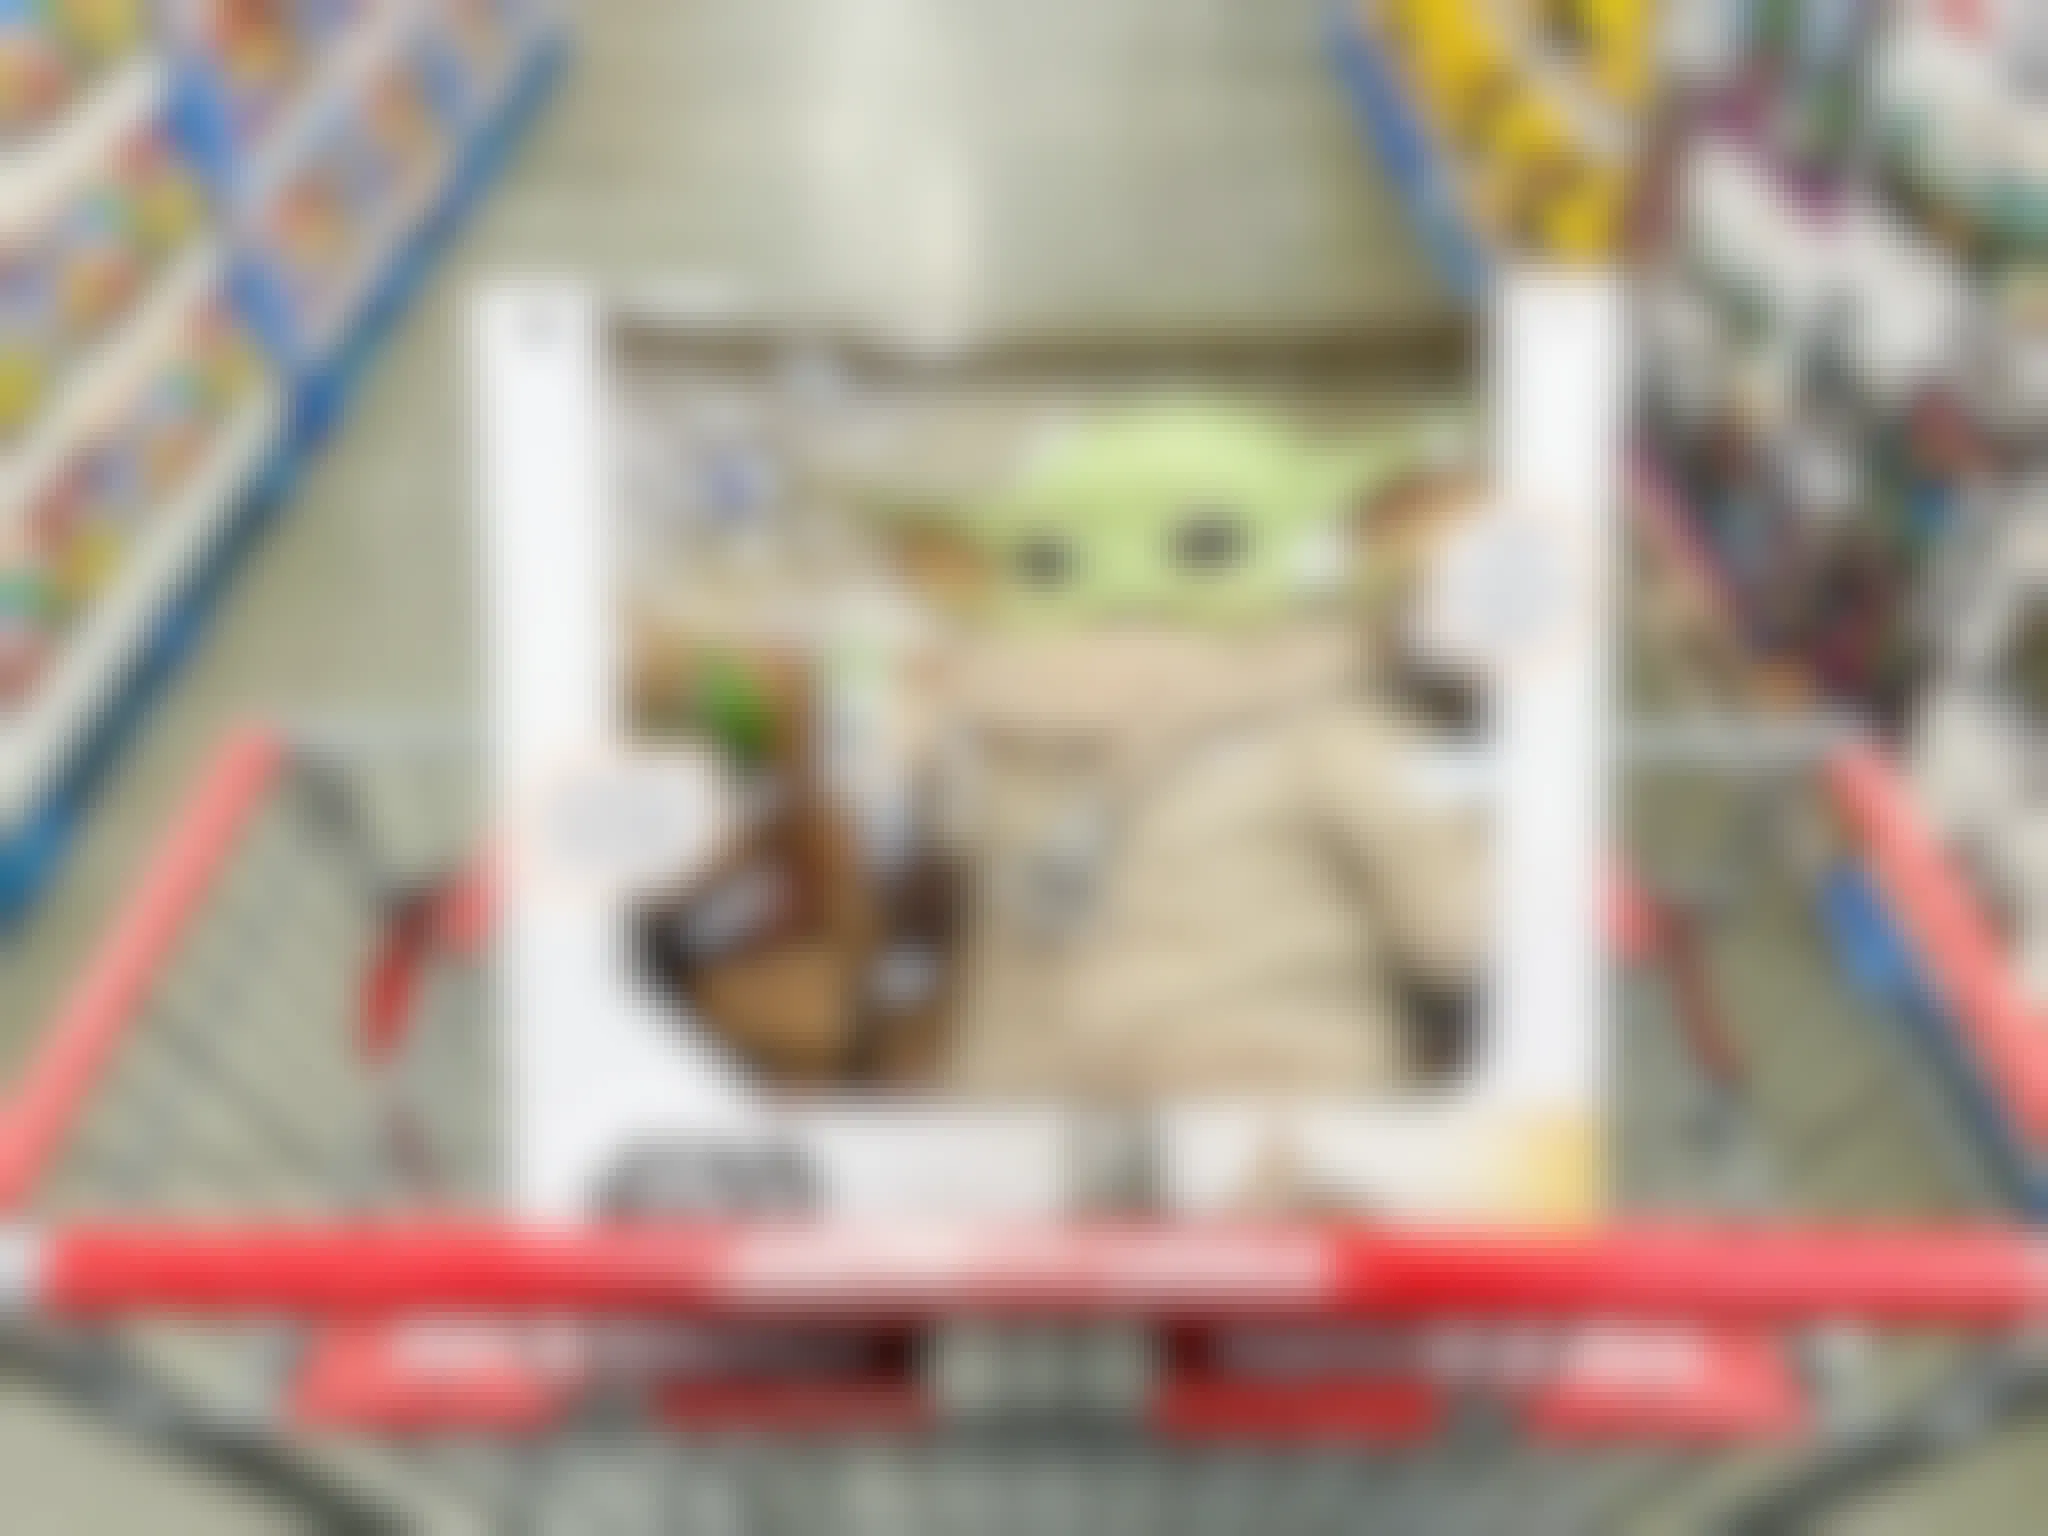 A Star Wars Yoda toy in the basket of a Costco shopping cart parked in the toy aisle at Costco.